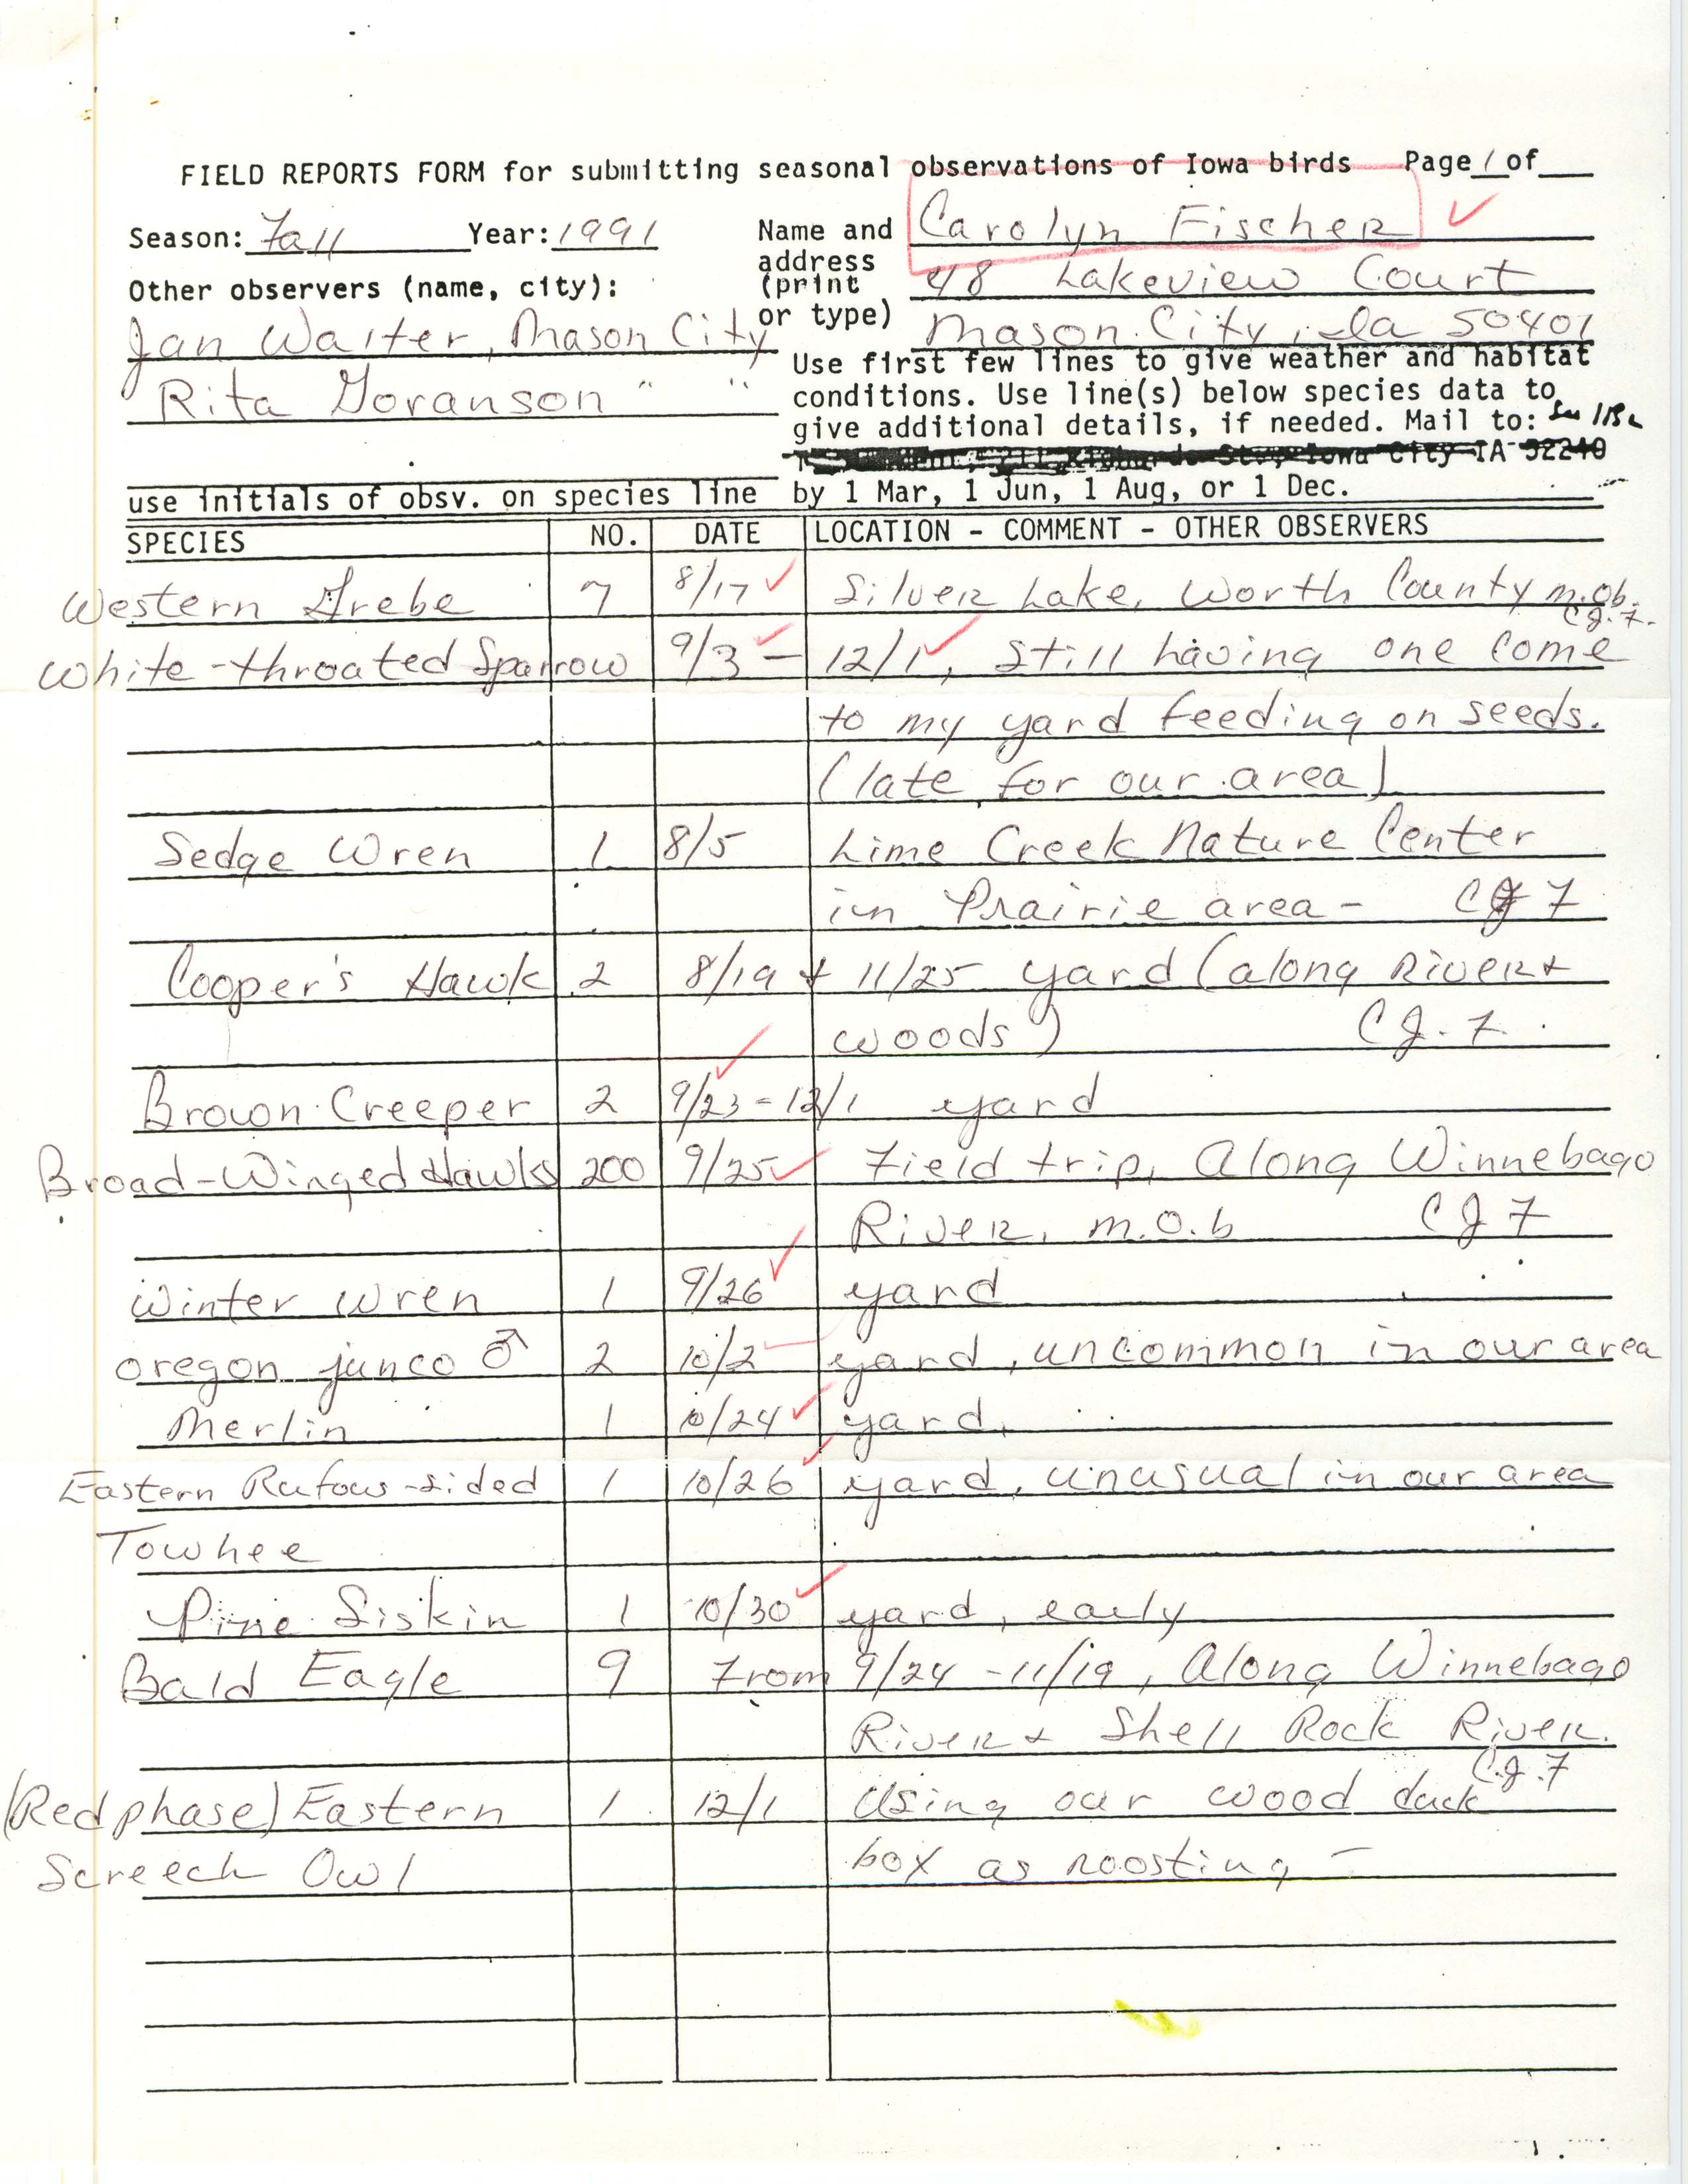 Field reports form for submitting seasonal observations of Iowa birds, Carolyn J. Fischer, fall 1991